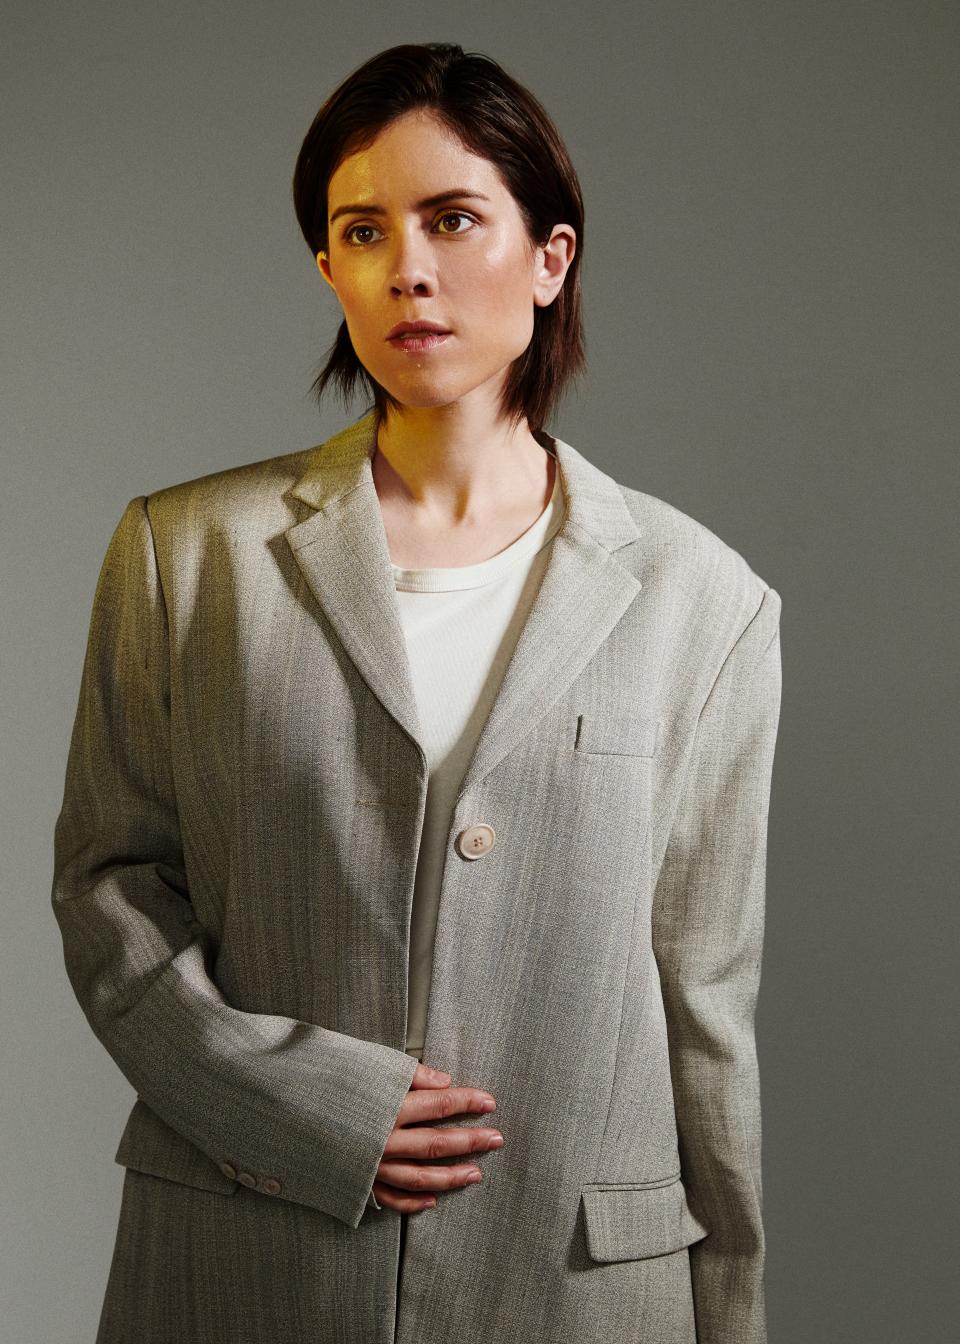 <cite class="credit">(Tegan) T-shirt, $110, by Jenni Kanye / Jacket, price upon request, by Jacquemus</cite>